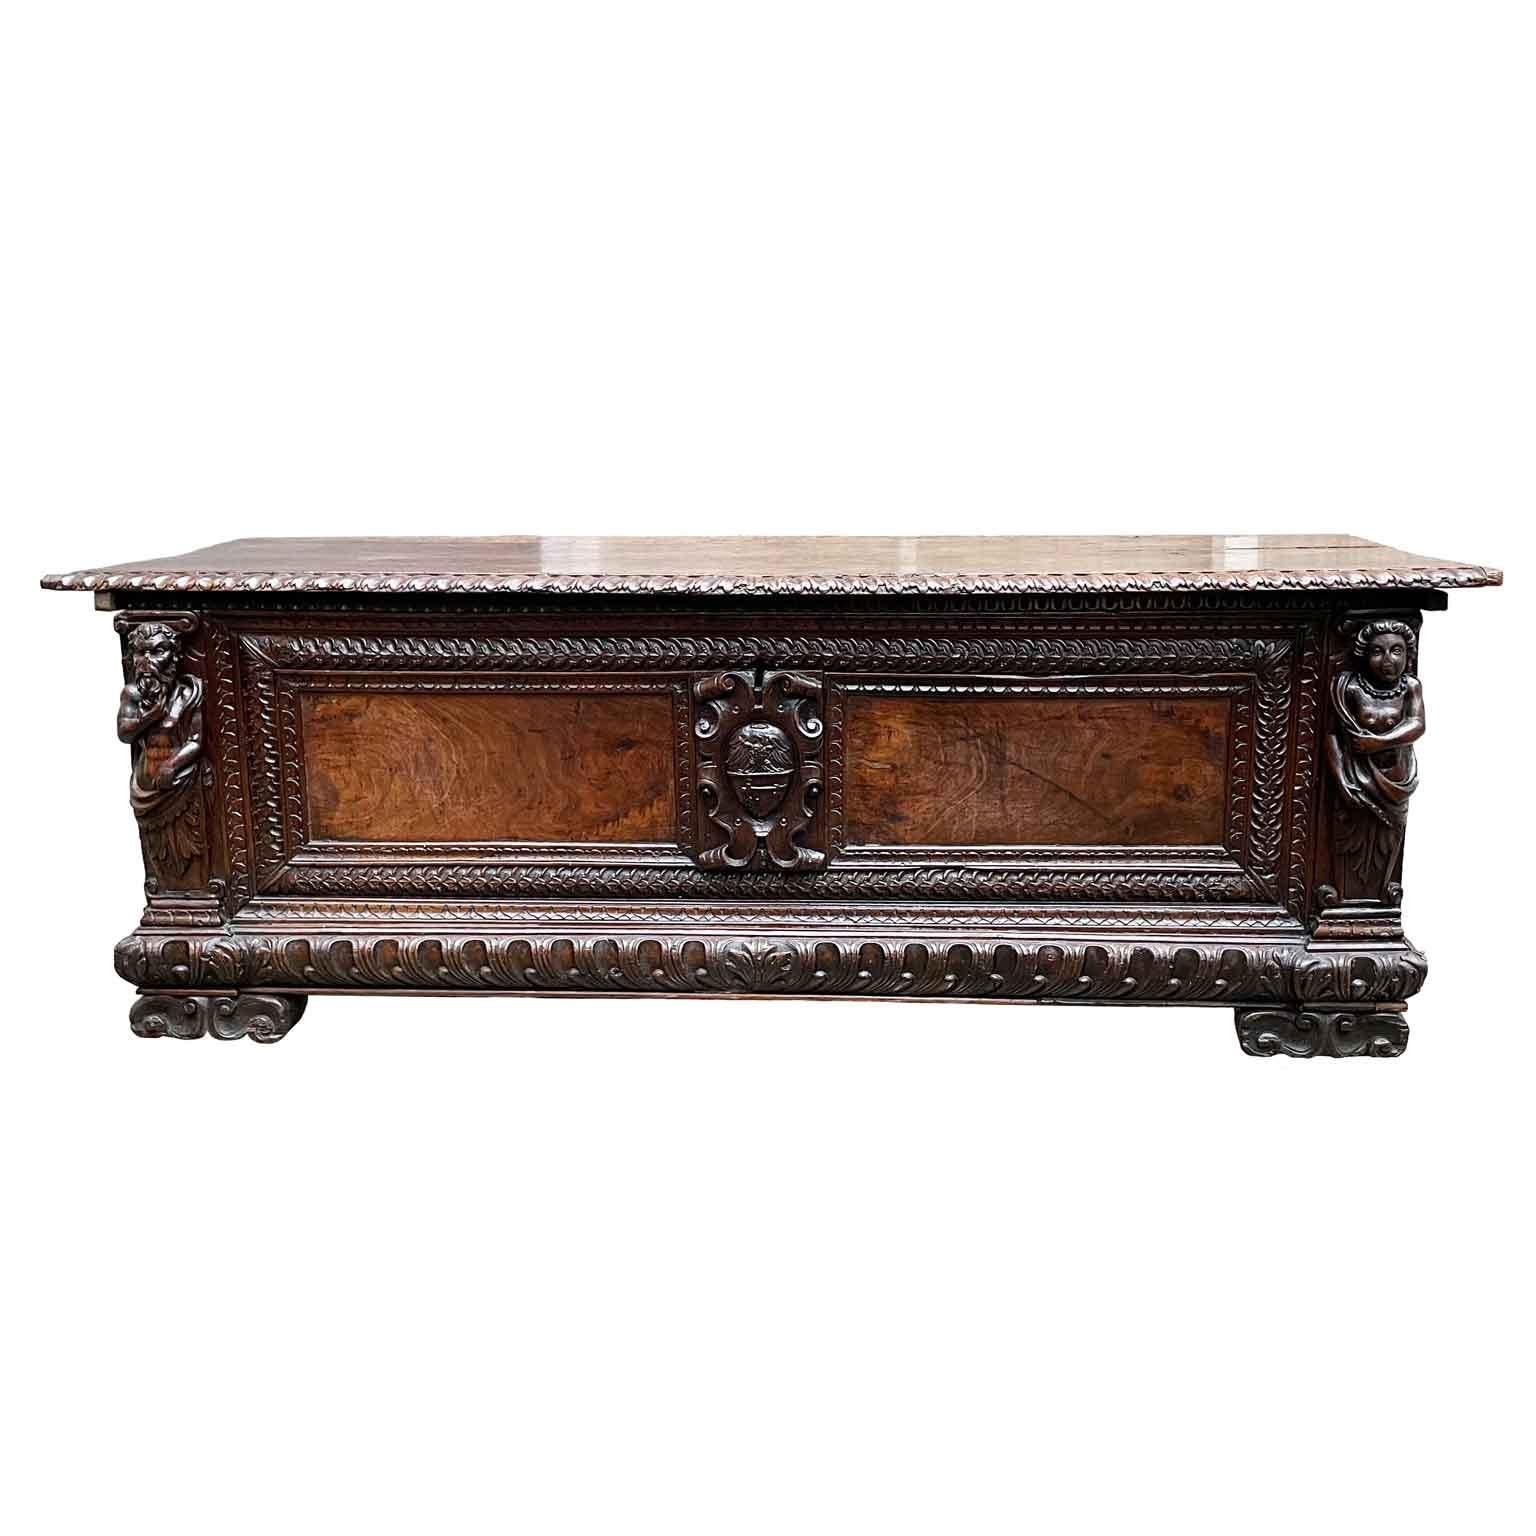 17th Century Italian Walnut Chest Arms and Caryatids Carving Renaissance Trunk 4